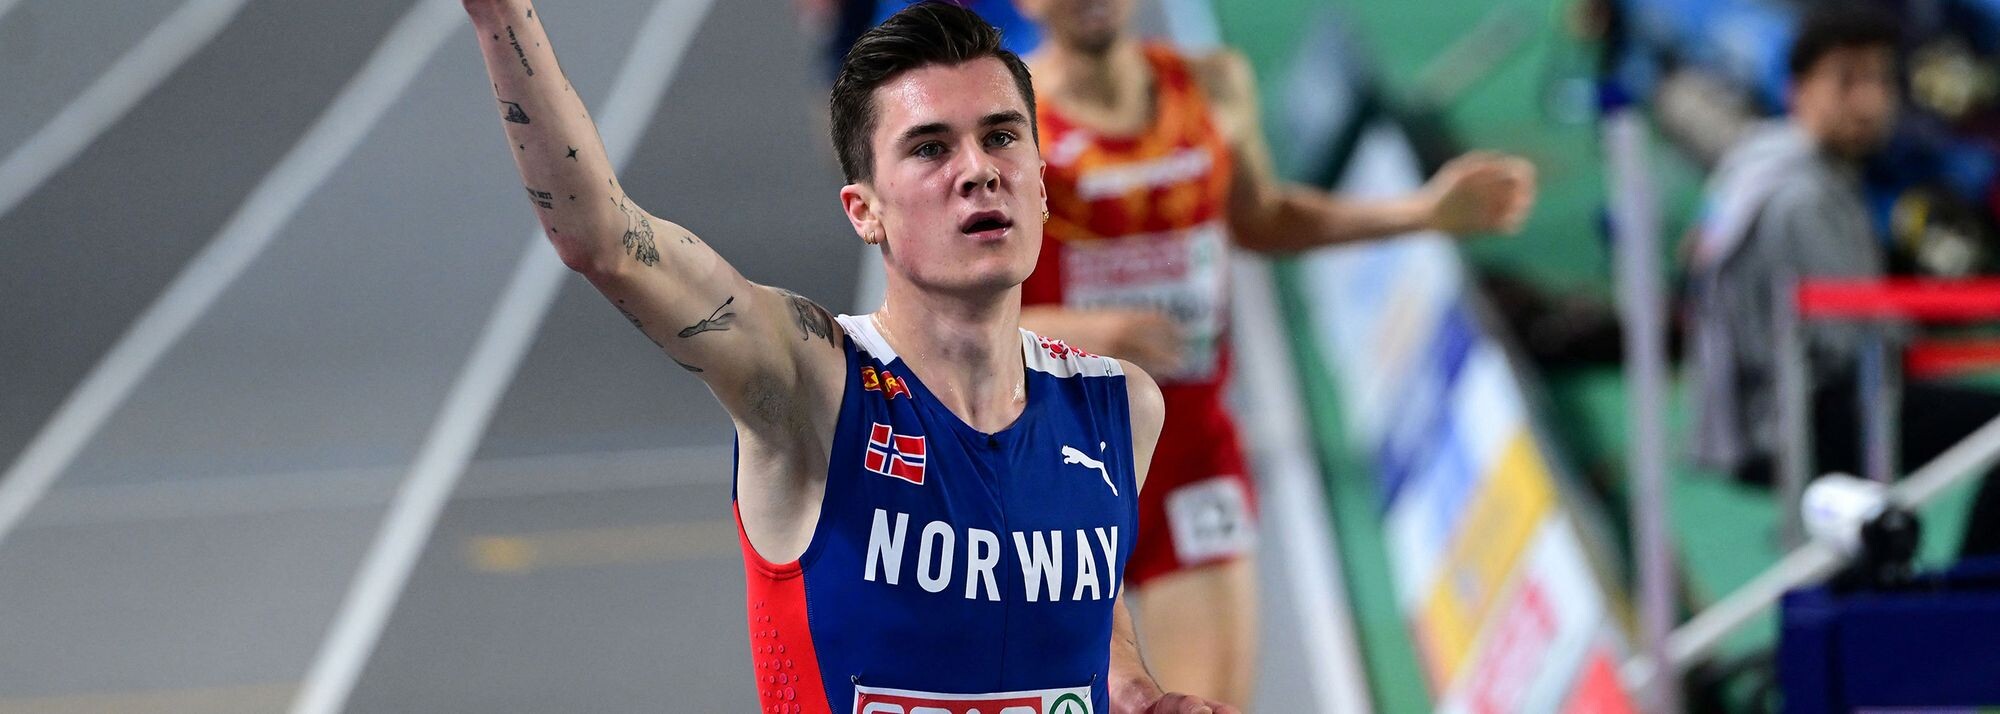 World Athletics: Wightman wins surprise 1,500m gold, Kerley out in 200m  sprint